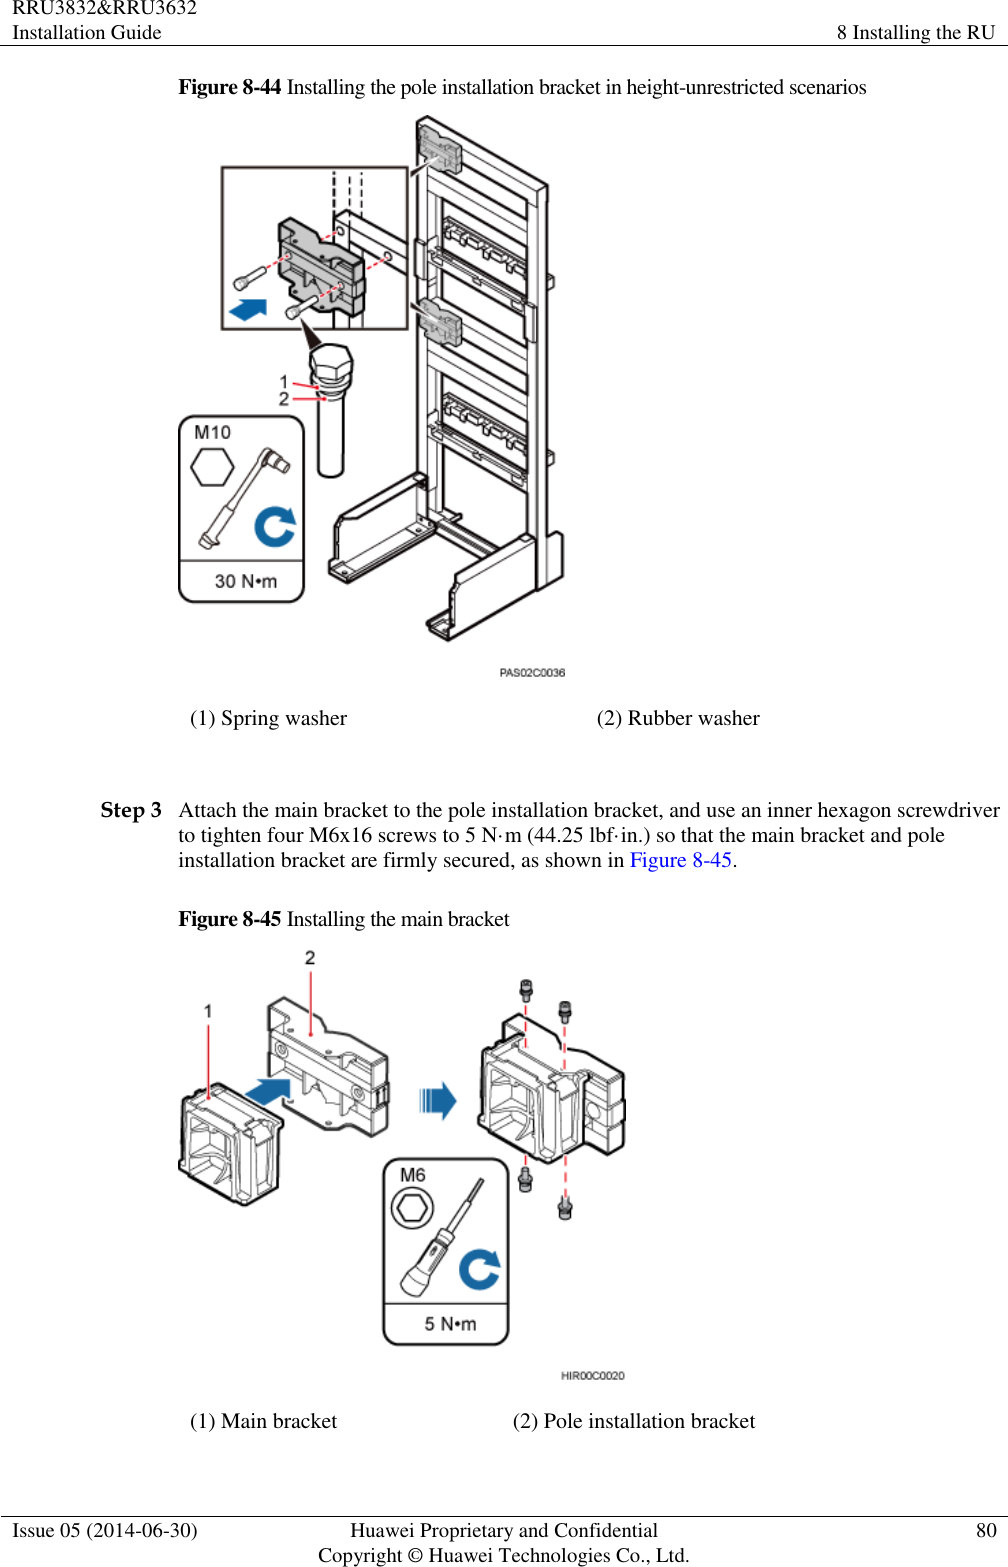 RRU3832&amp;RRU3632 Installation Guide 8 Installing the RU  Issue 05 (2014-06-30) Huawei Proprietary and Confidential                                     Copyright © Huawei Technologies Co., Ltd. 80  Figure 8-44 Installing the pole installation bracket in height-unrestricted scenarios  (1) Spring washer (2) Rubber washer  Step 3 Attach the main bracket to the pole installation bracket, and use an inner hexagon screwdriver to tighten four M6x16 screws to 5 N·m (44.25 lbf·in.) so that the main bracket and pole installation bracket are firmly secured, as shown in Figure 8-45. Figure 8-45 Installing the main bracket  (1) Main bracket (2) Pole installation bracket 